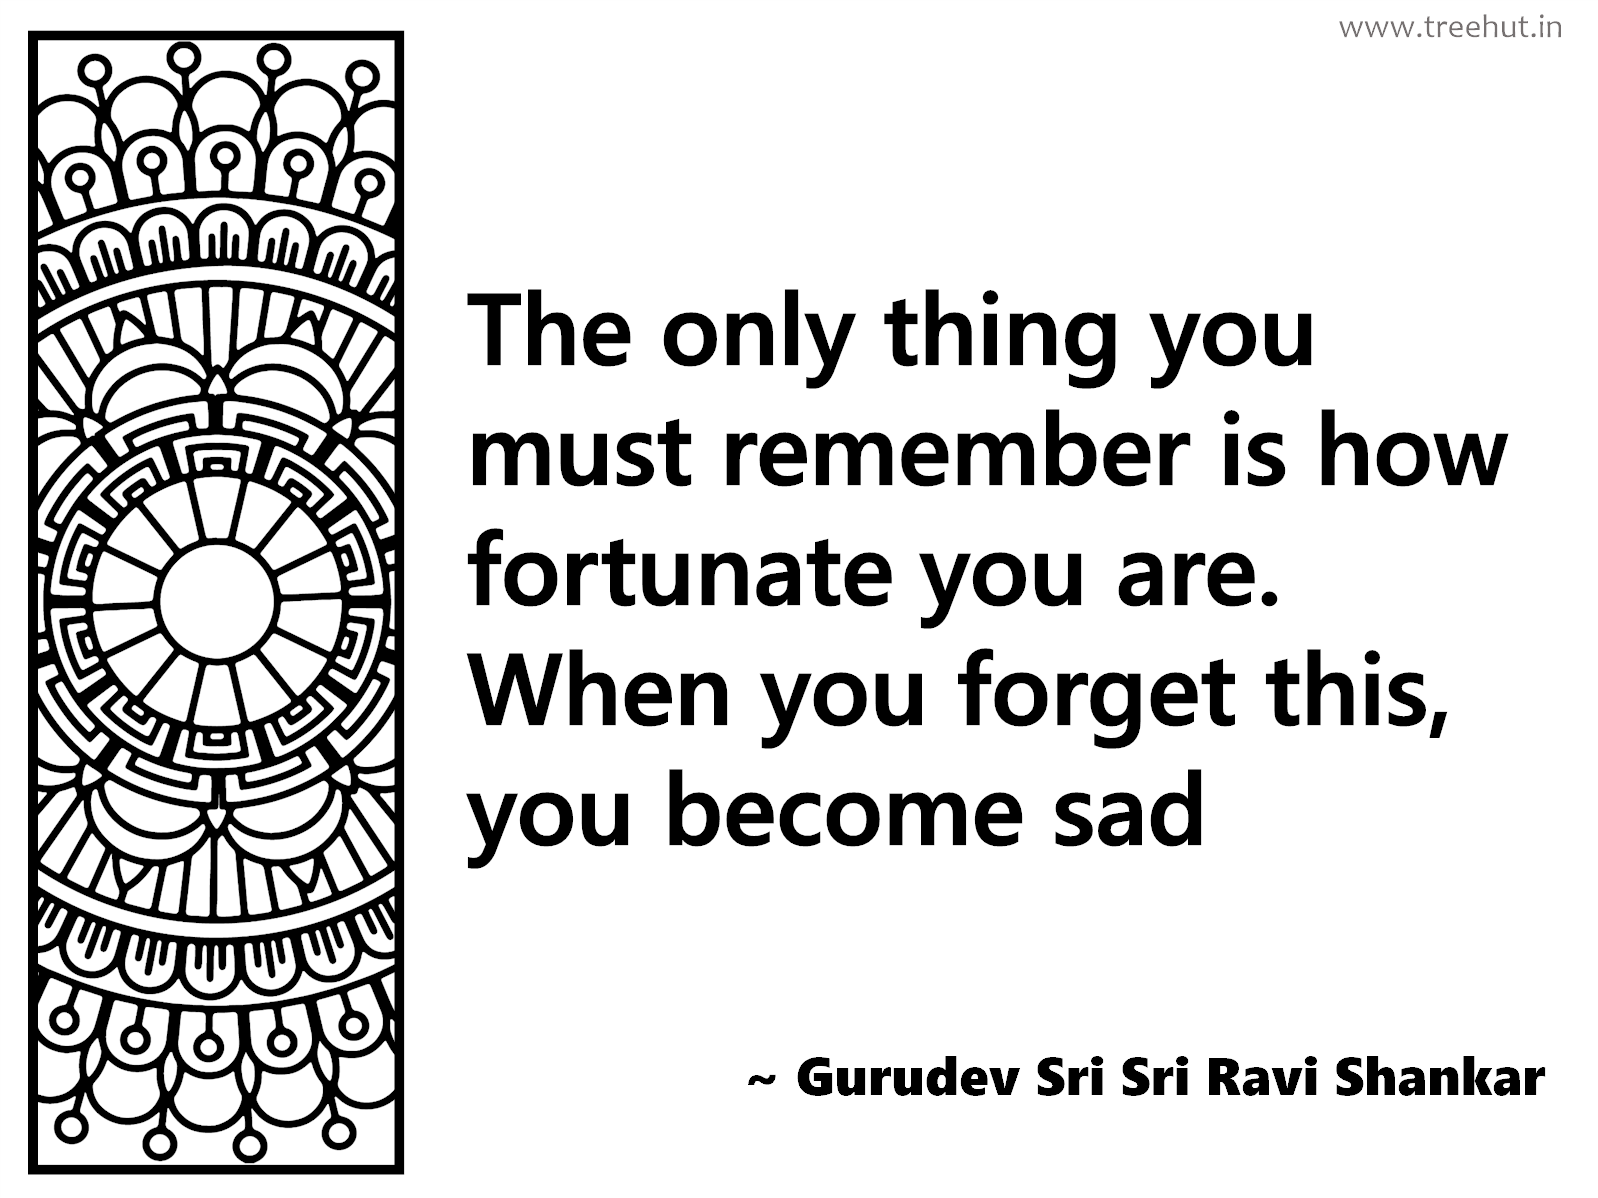 The only thing you must remember is how fortunate you are. When you forget this, you become sad Inspirational Quote by Gurudev Sri Sri Ravi Shankar, coloring pages